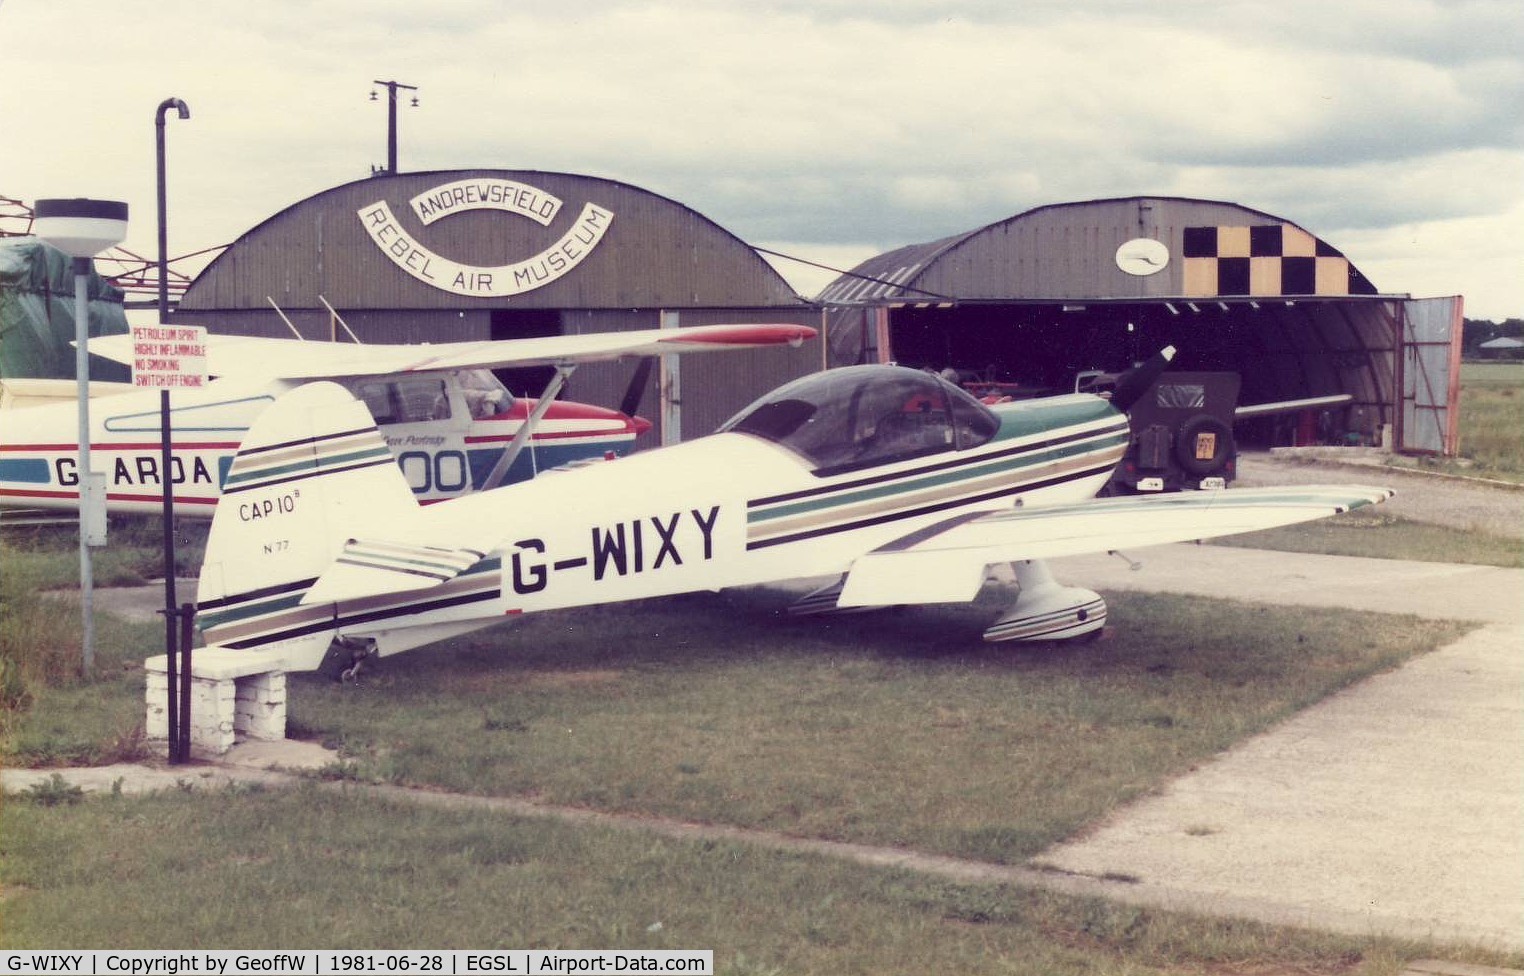 G-WIXY, 1977 Mudry CAP-10B C/N 77, G-WIXY a resident at Andrewsfield in 1981